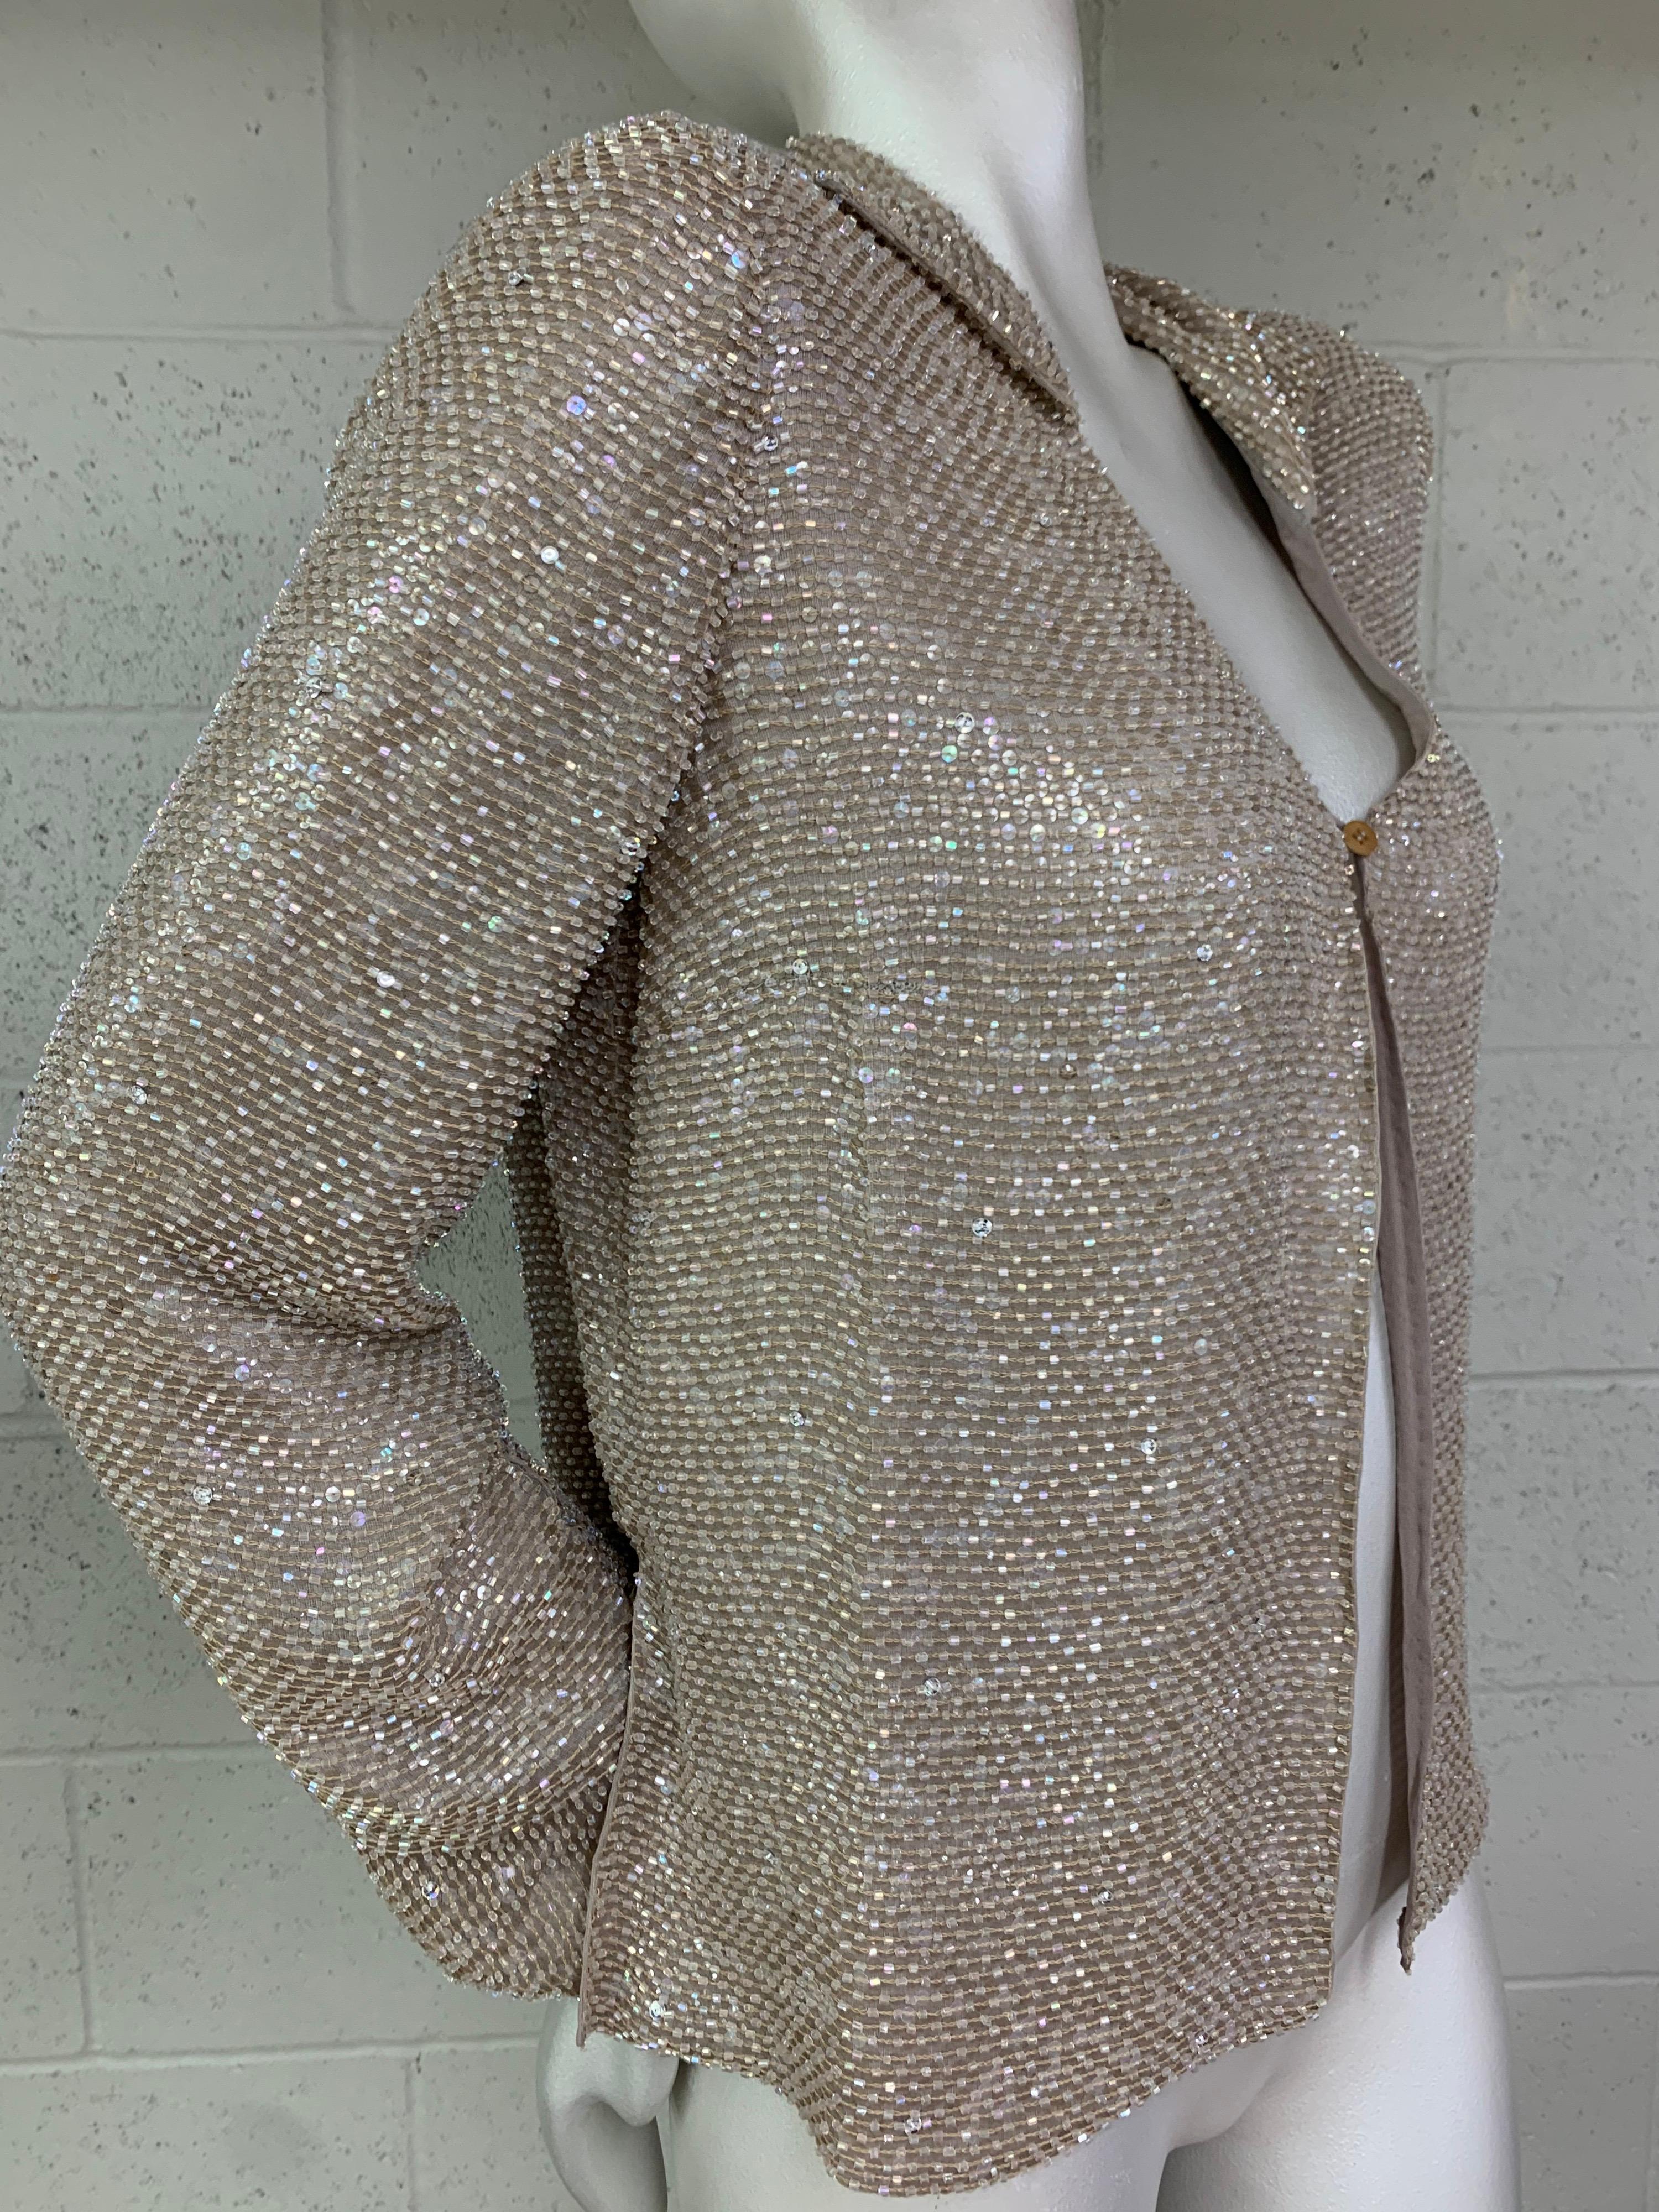 A stunning 2000s Giorgio Armani dusty rose beaded and sequined silk jacket with single closure at front. Fully lined in silk. Vented cuffs. Size EU 46. New, never worn.